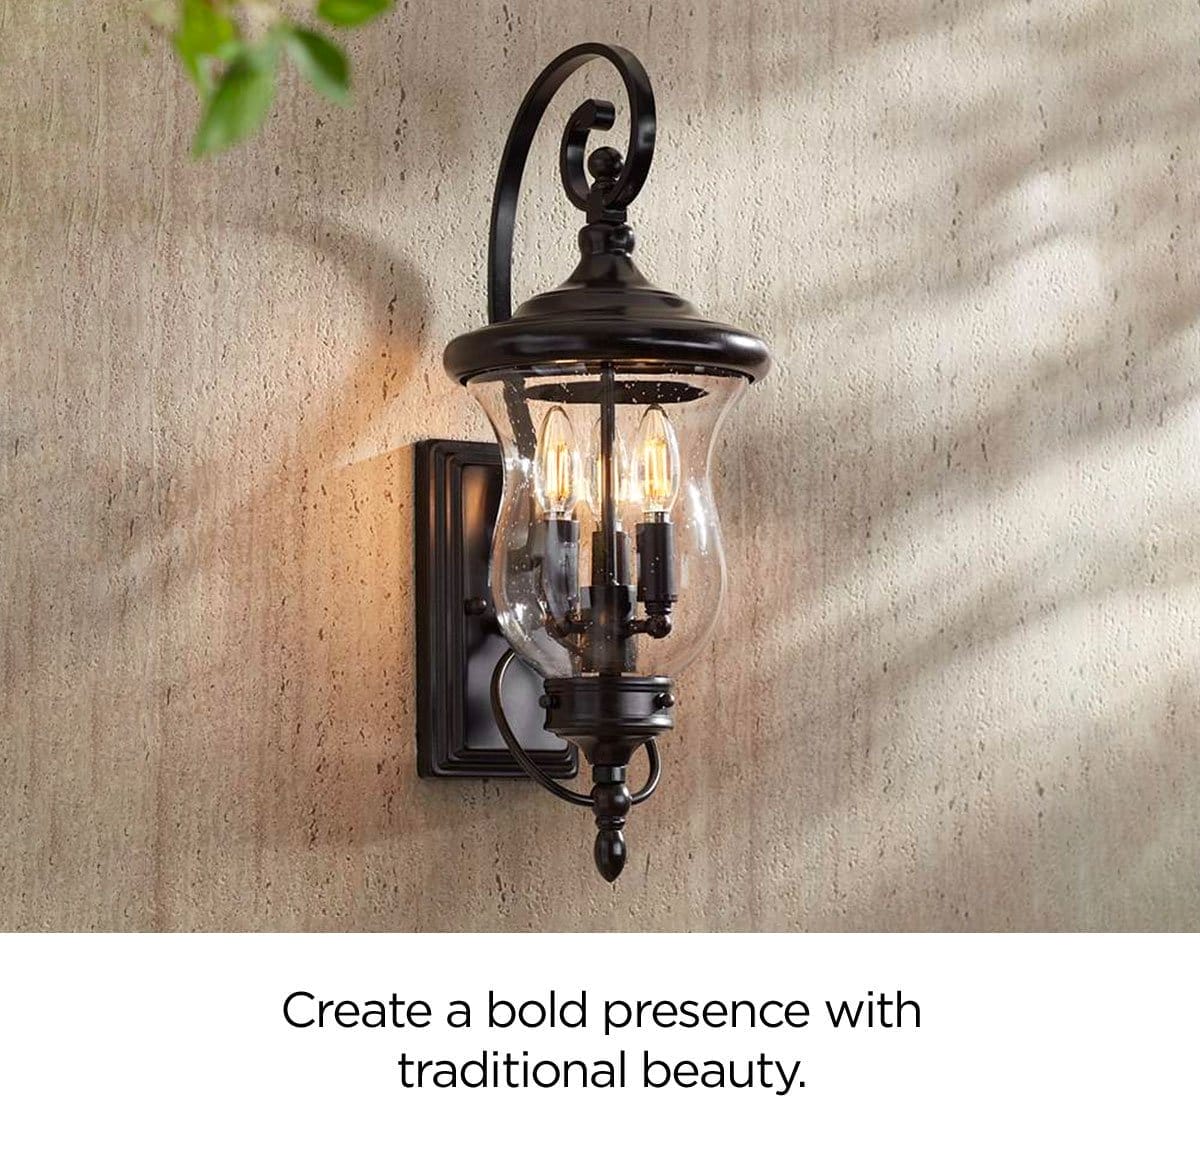 Create a bold presence with traditional beauty.